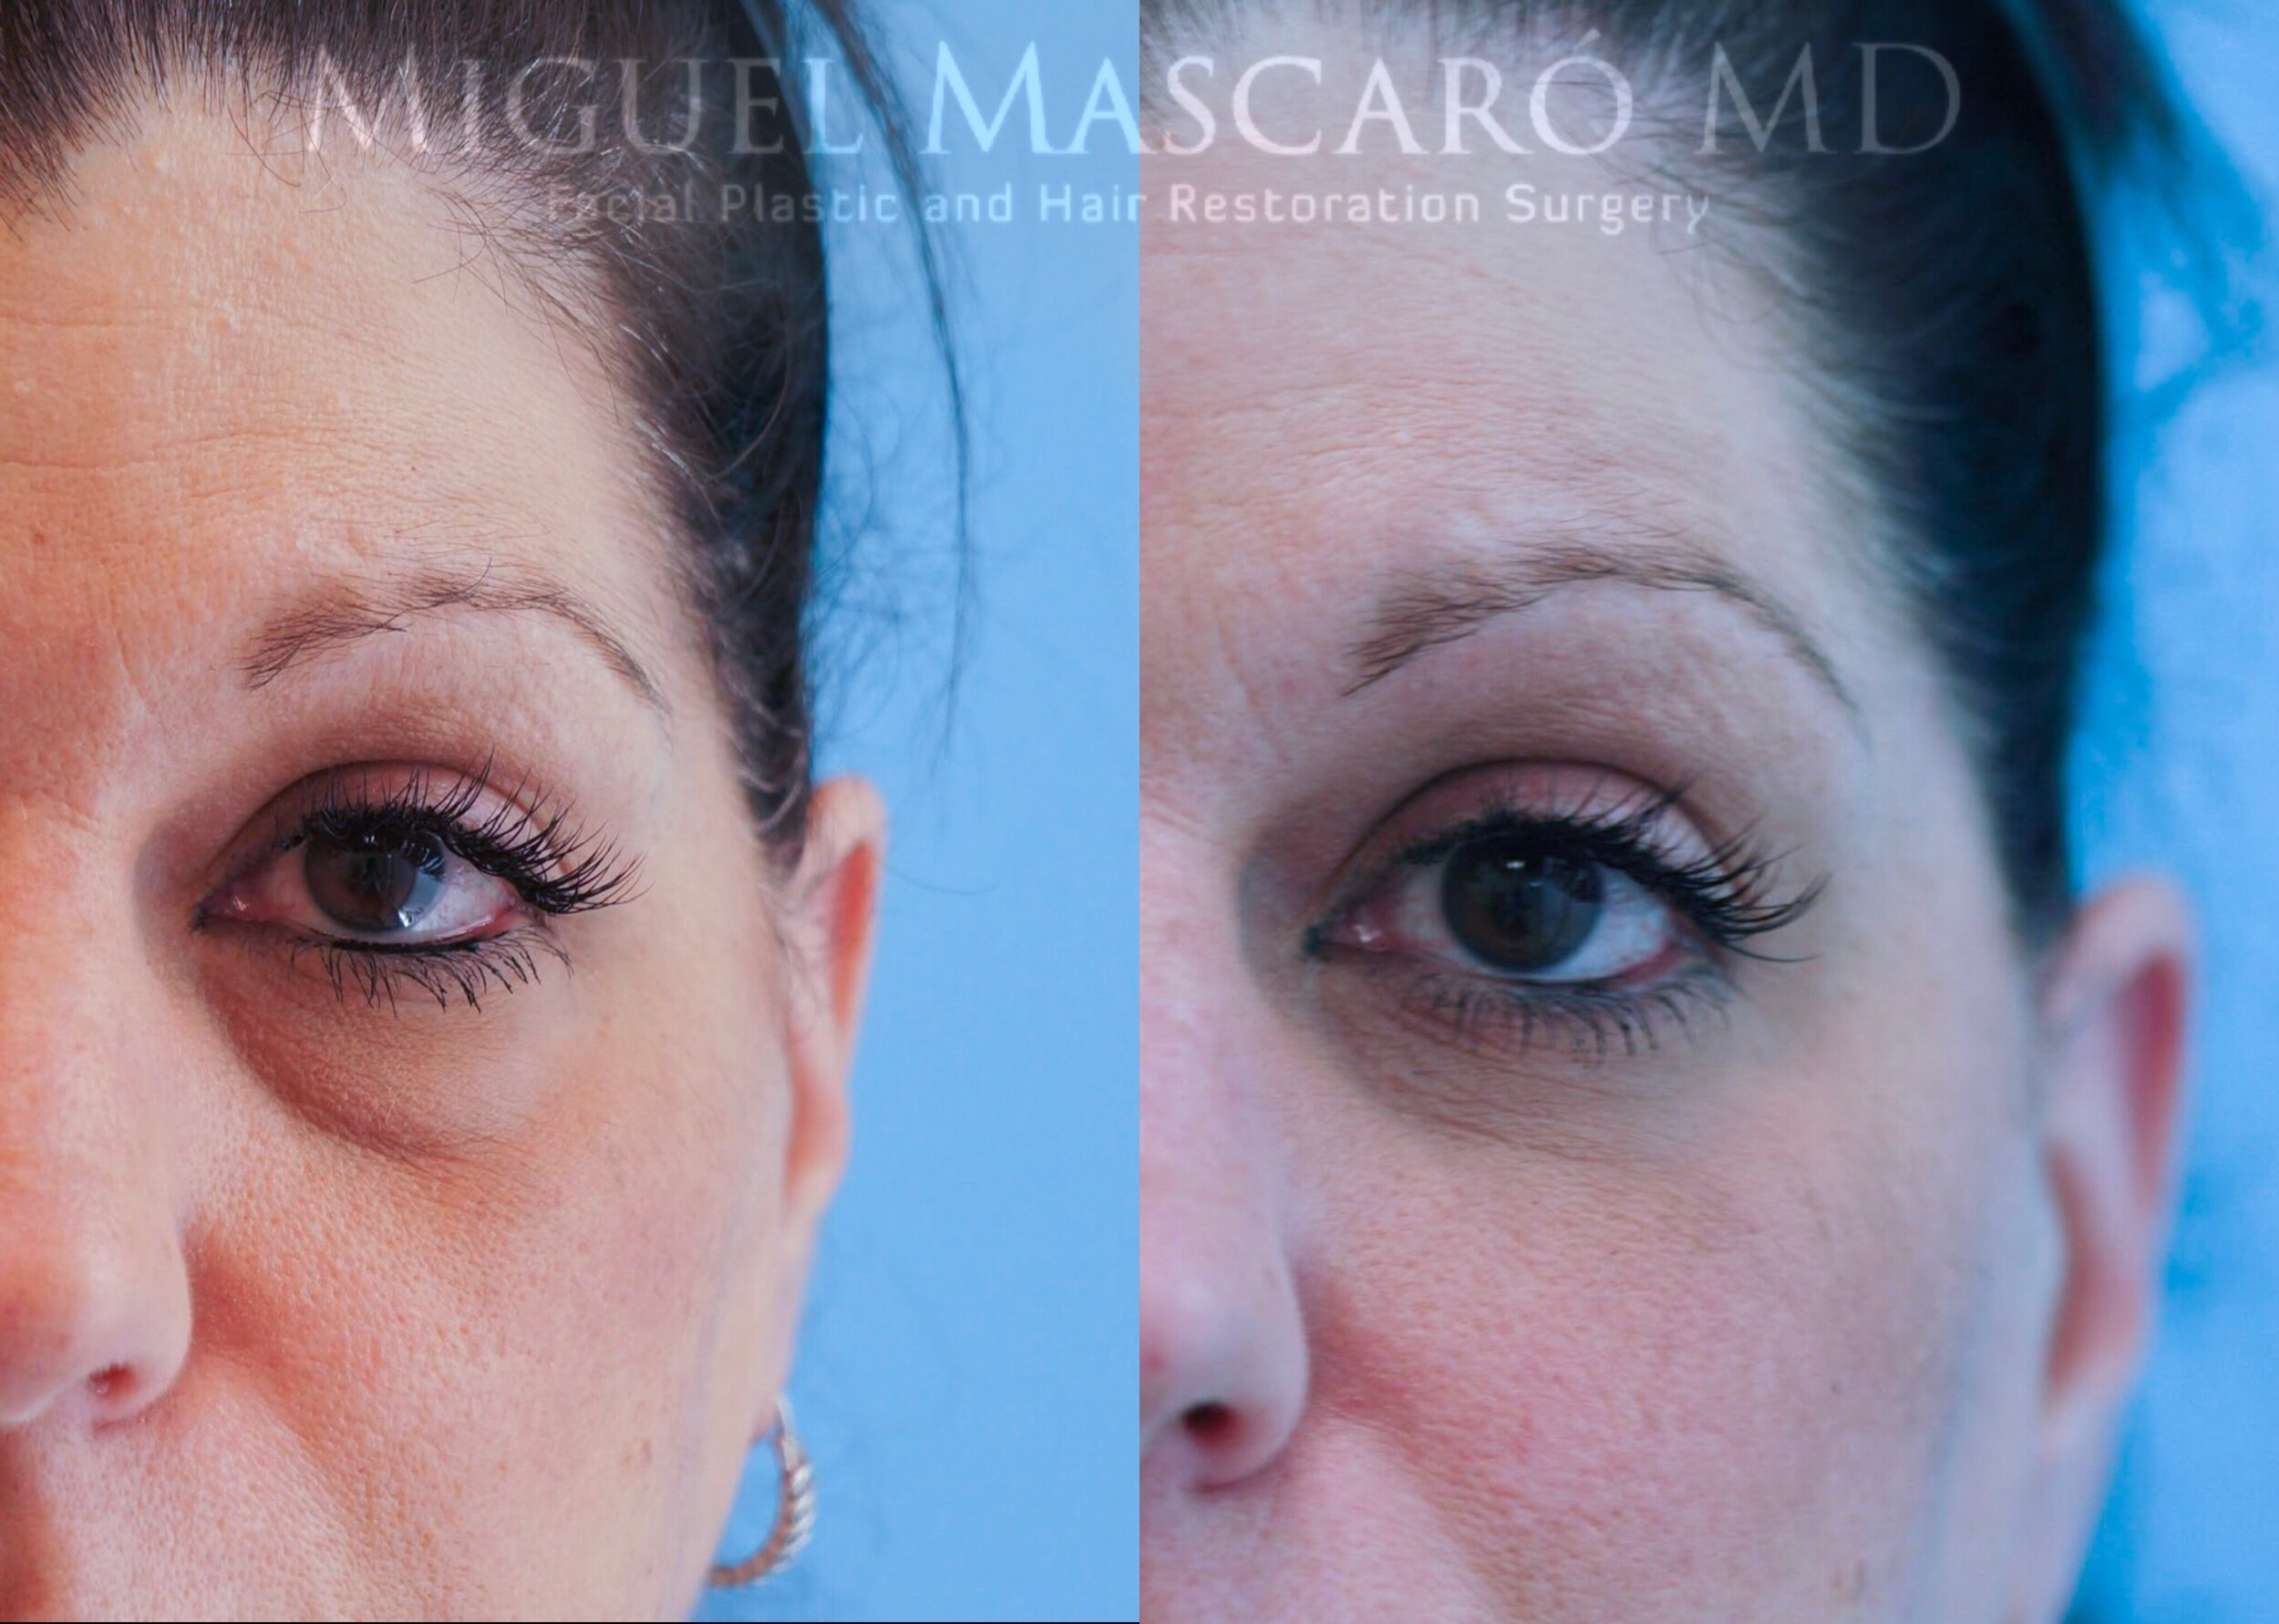  Lower blepharoplasty with fat transfer   